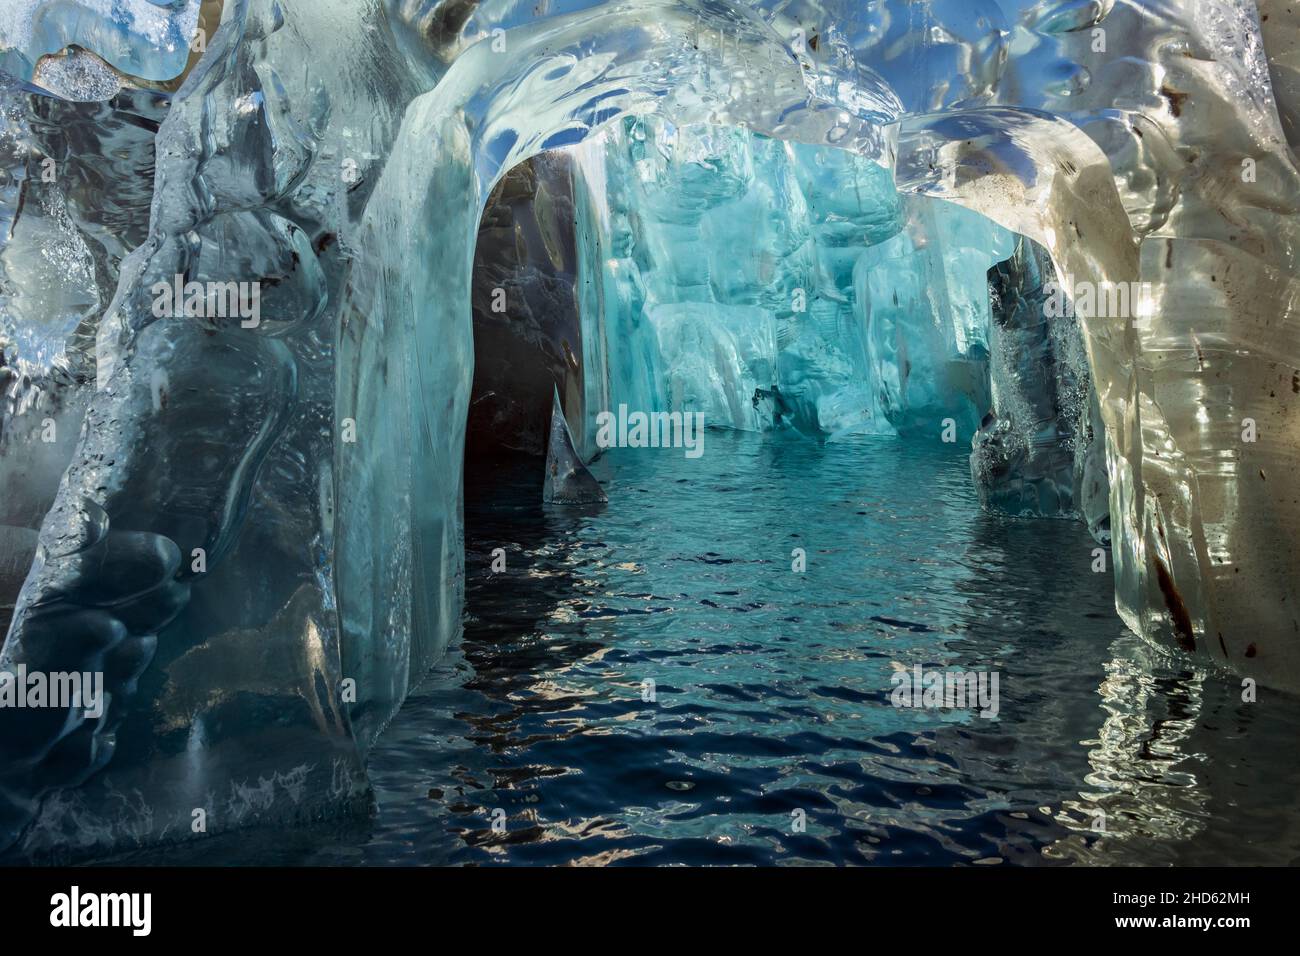 Crystal ice cave in an old highly compressed iceberg off Rolige Brae Glacier, Rodefjord, Scoresby Sund, Greenland Stock Photo